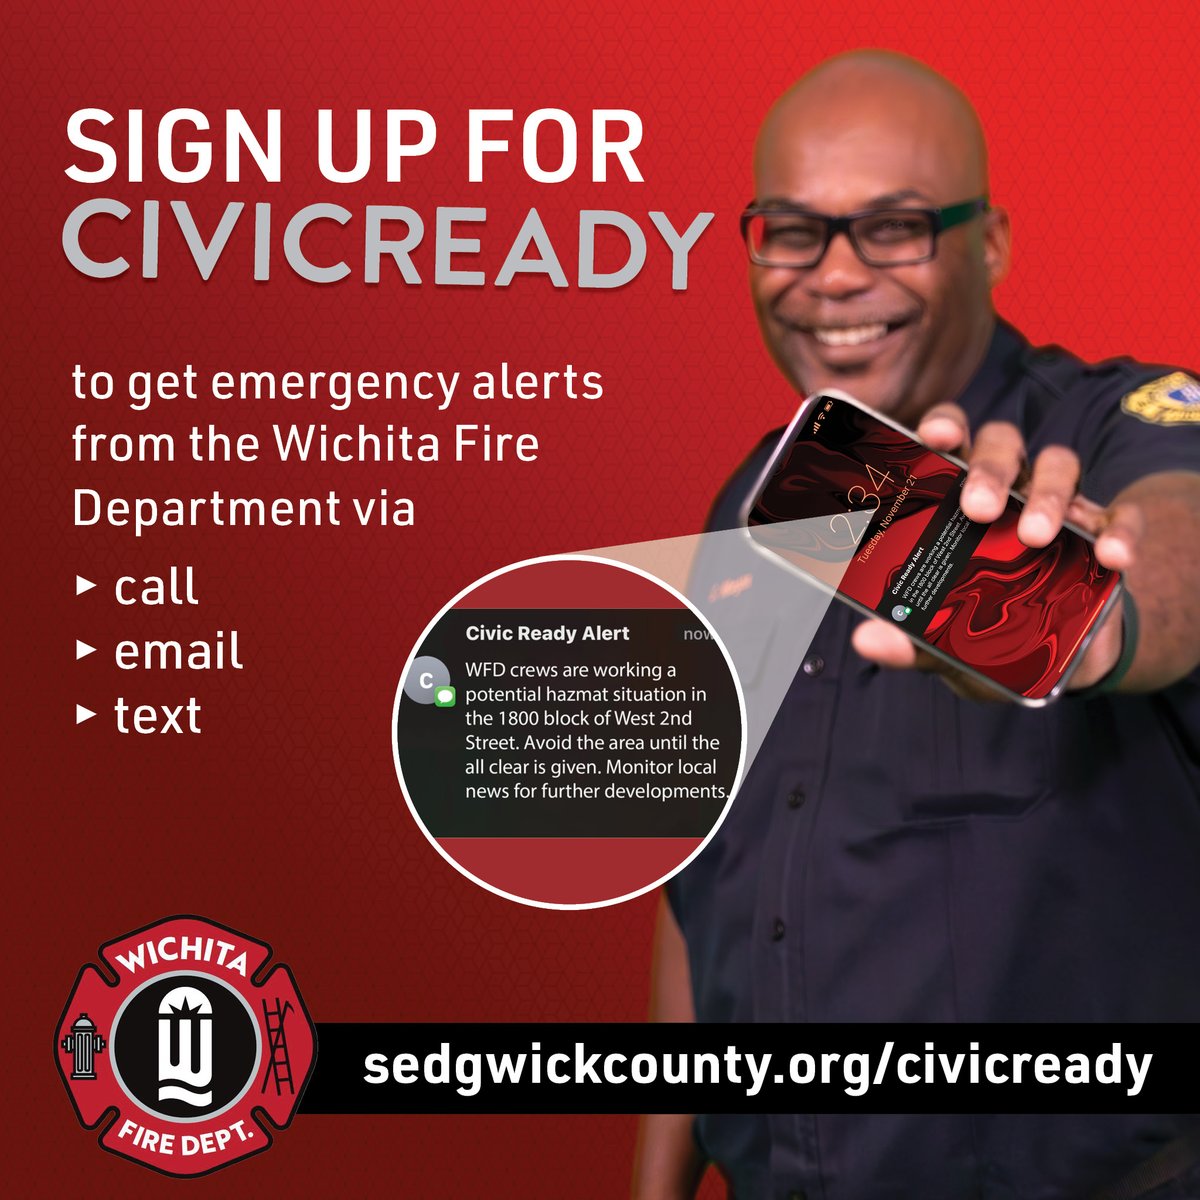 Lt. Morgan reminds you to sign up for Civic Read alerts! Sign up to receive community bulletins, emergency alerts, and severe weather warnings that could directly impact you and your family. #wichitaFD